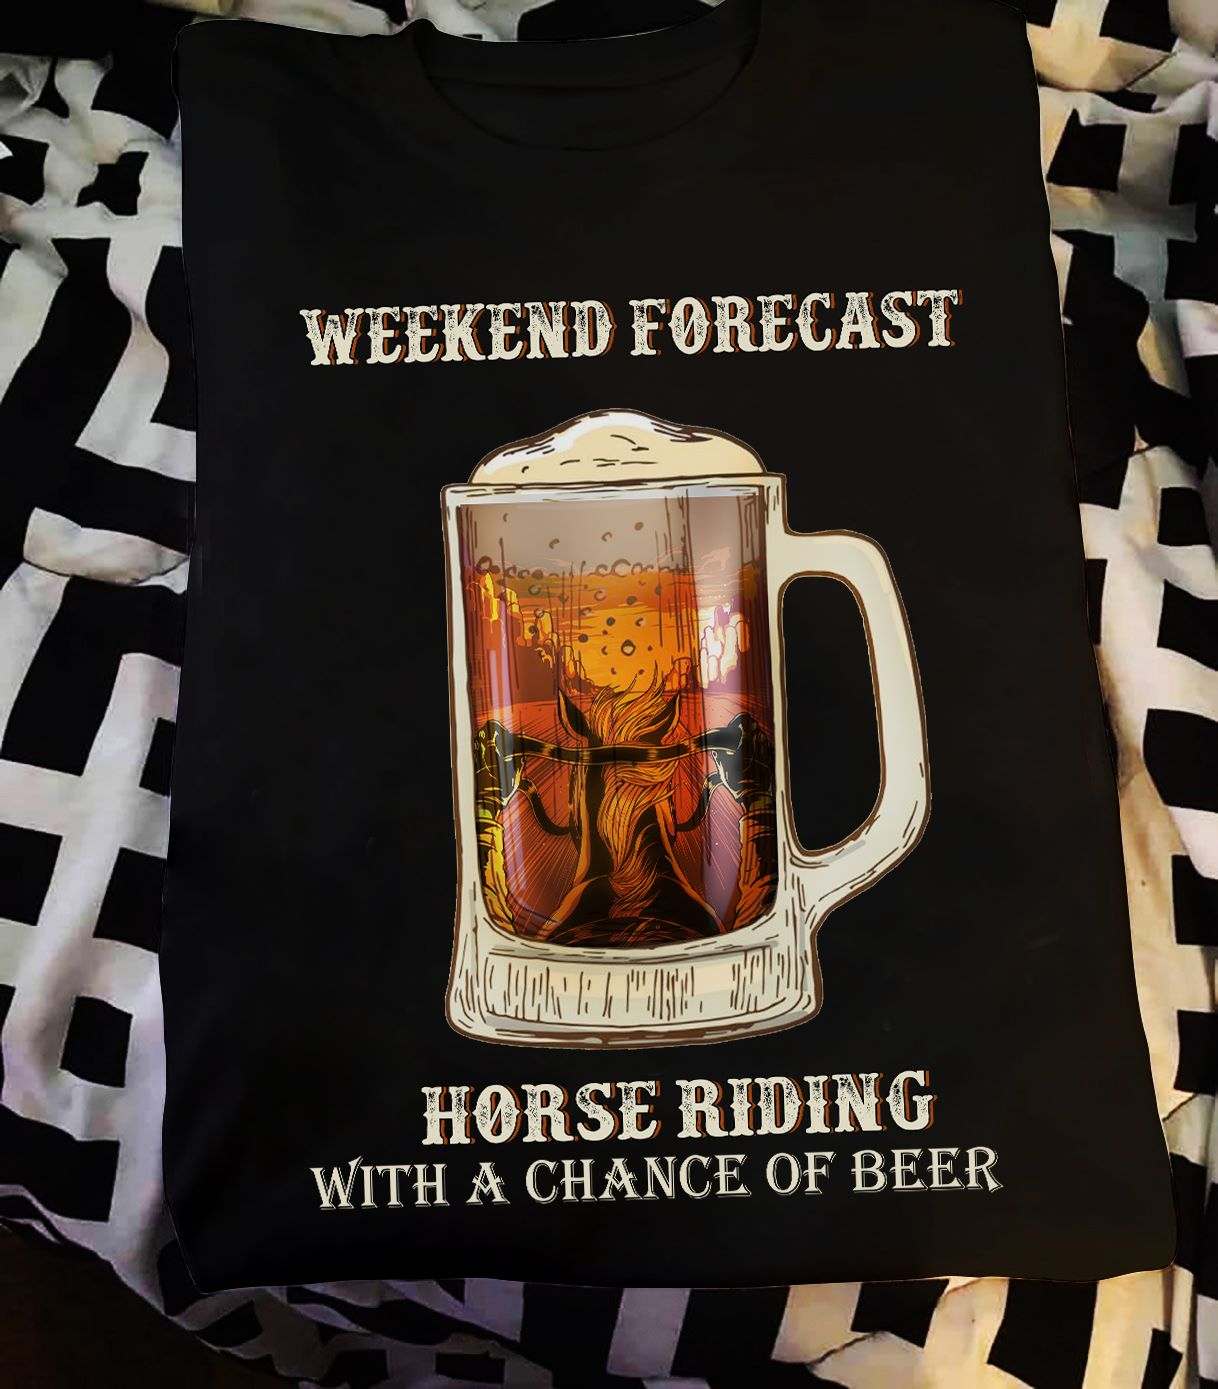 Weekend forecast horse riding with a chance of beer - Beer lover